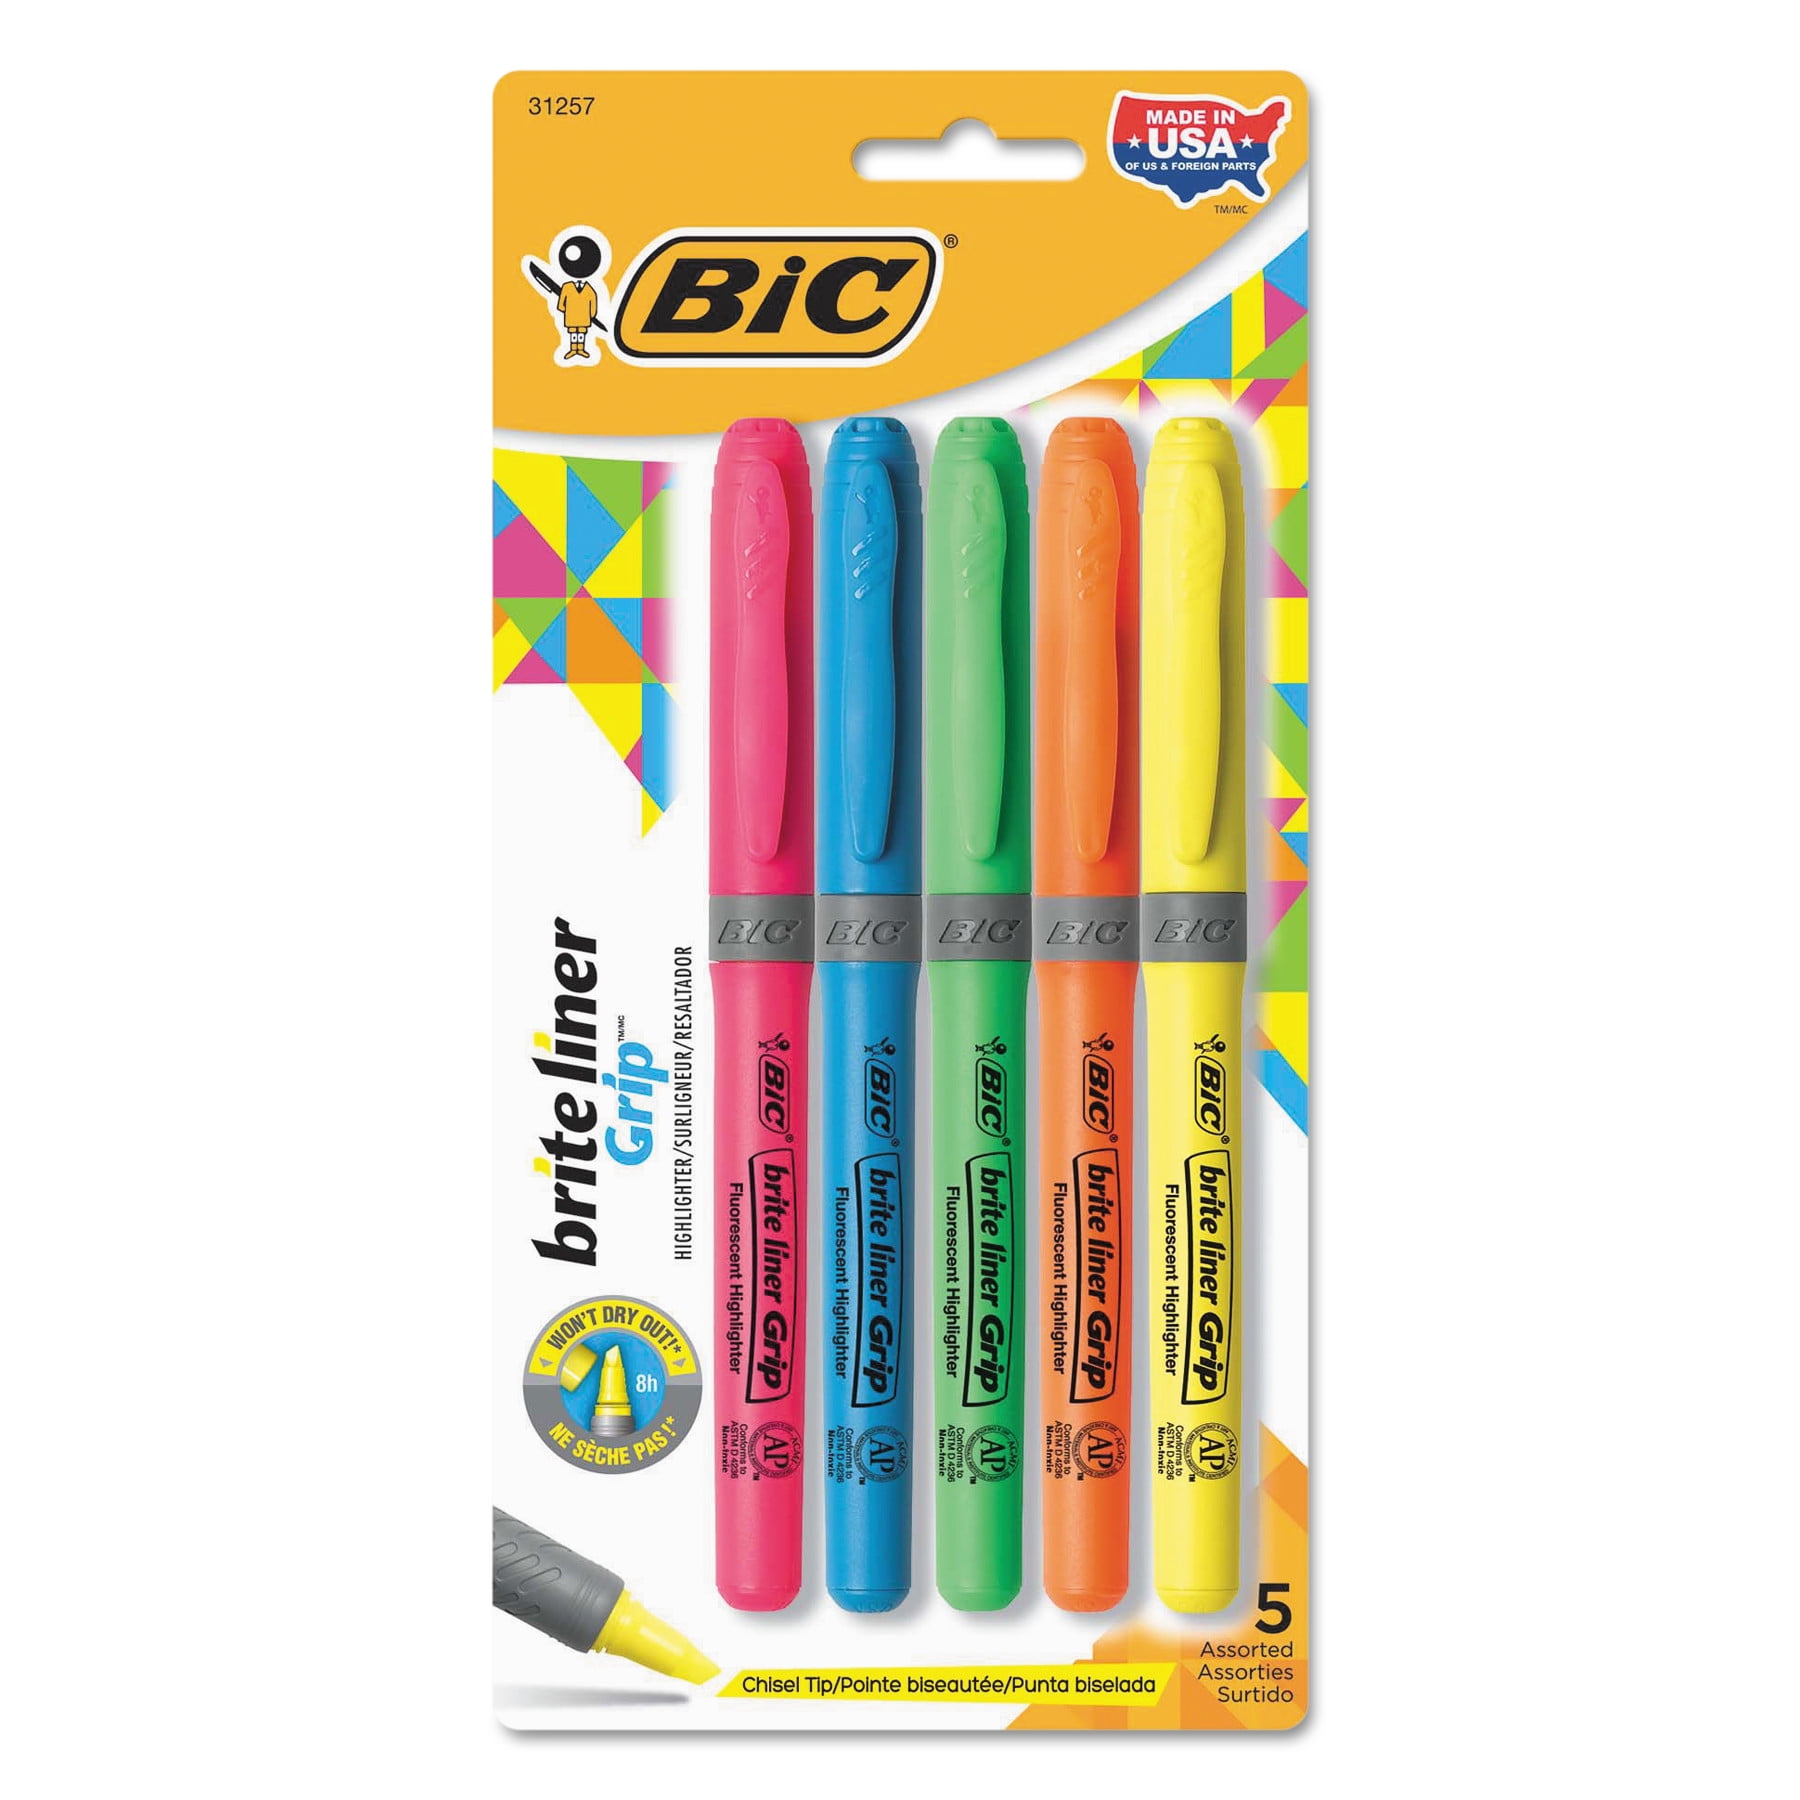 BIC Brite Liner Stick Highlighters, Chisel, Assorted, 5/Pack (BLP51W-AST) -  Yahoo Shopping